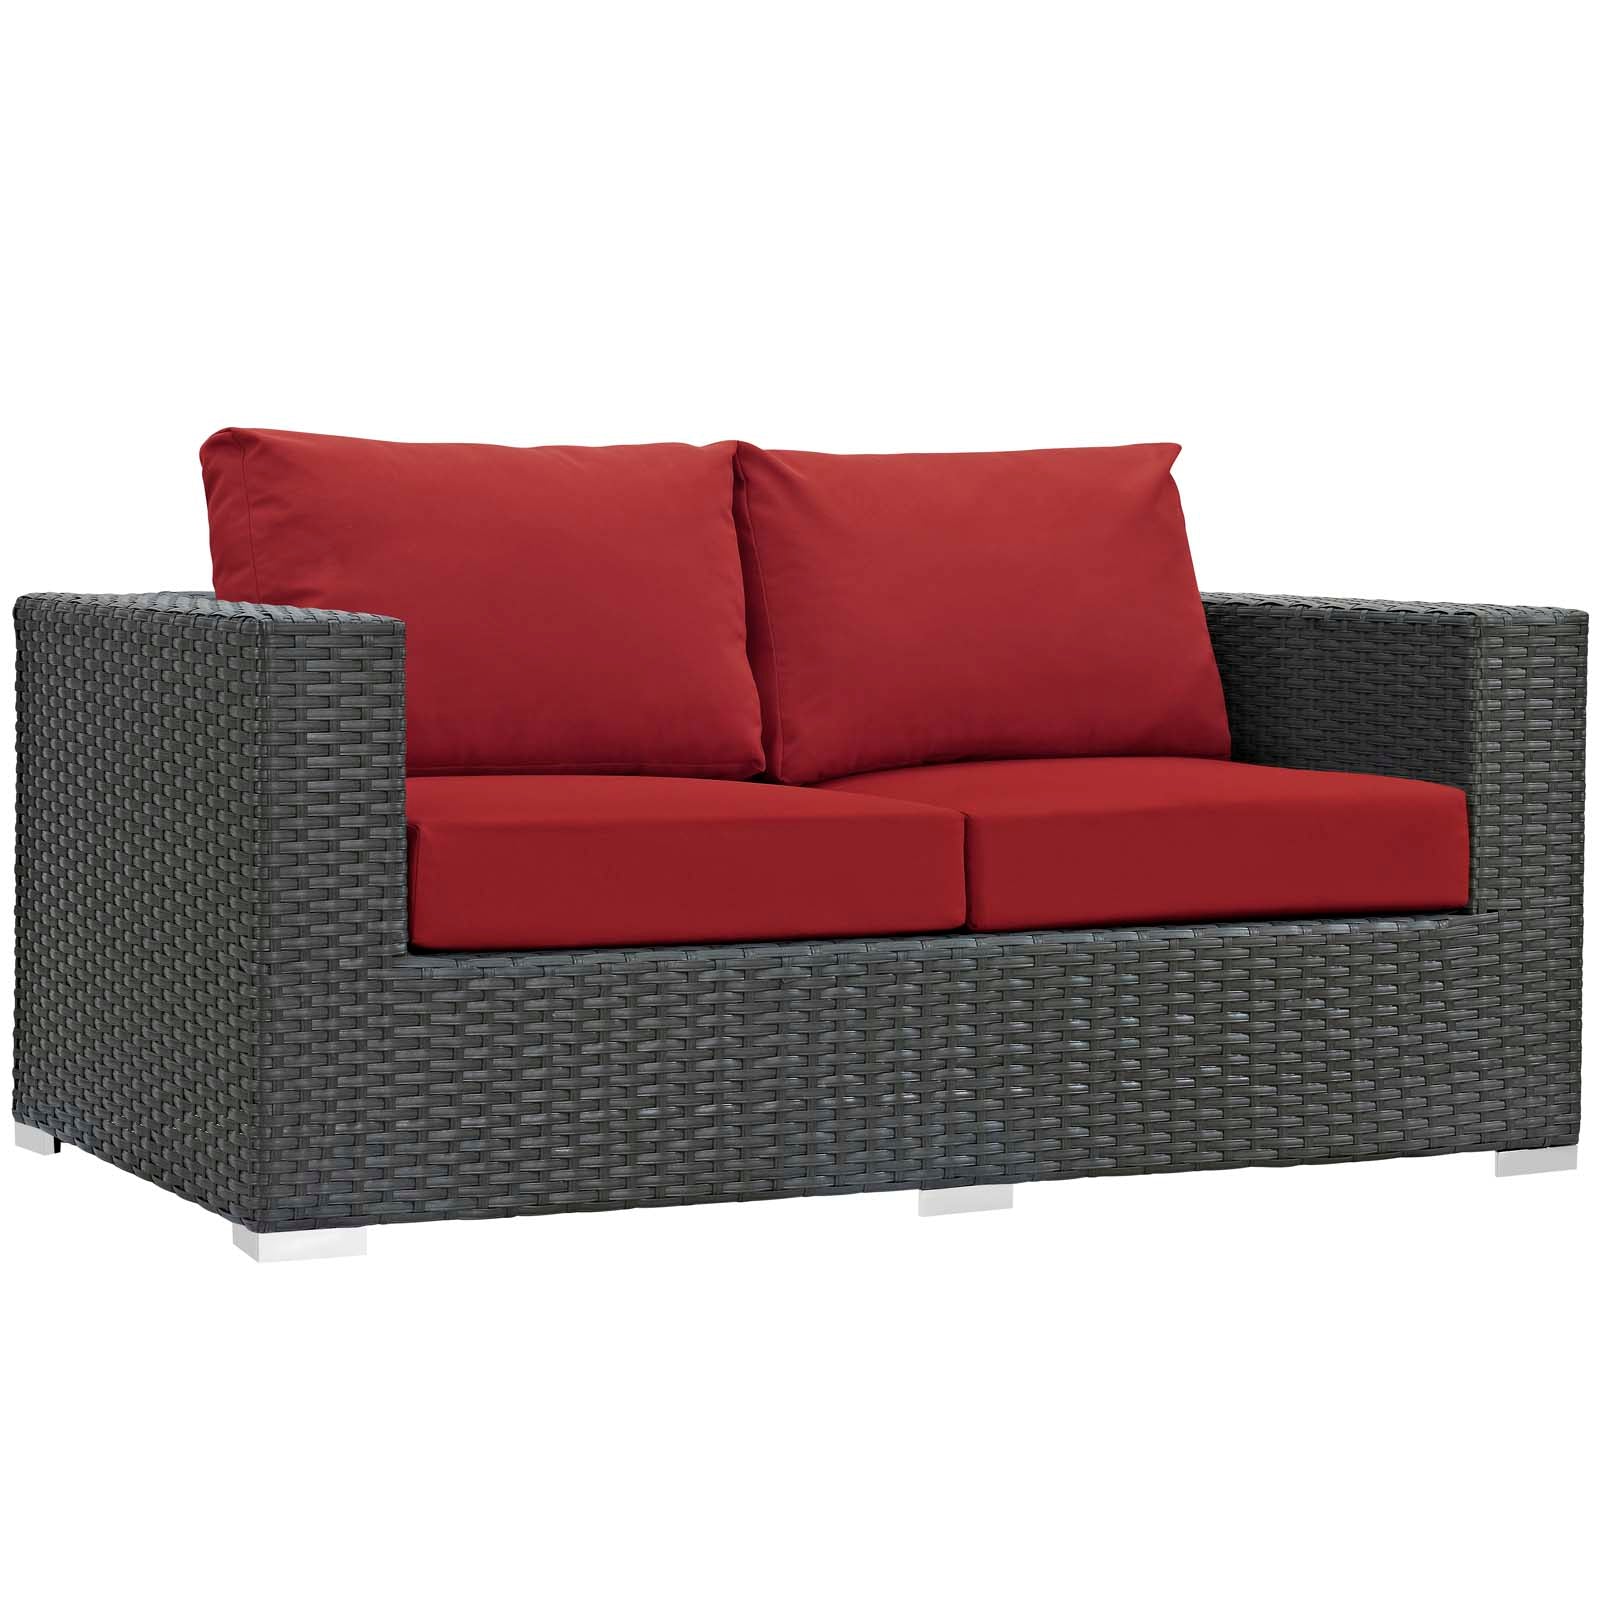 Modway Outdoor Sofas - Sojourn Outdoor Patio Sunbrella Loveseat Canvas Red